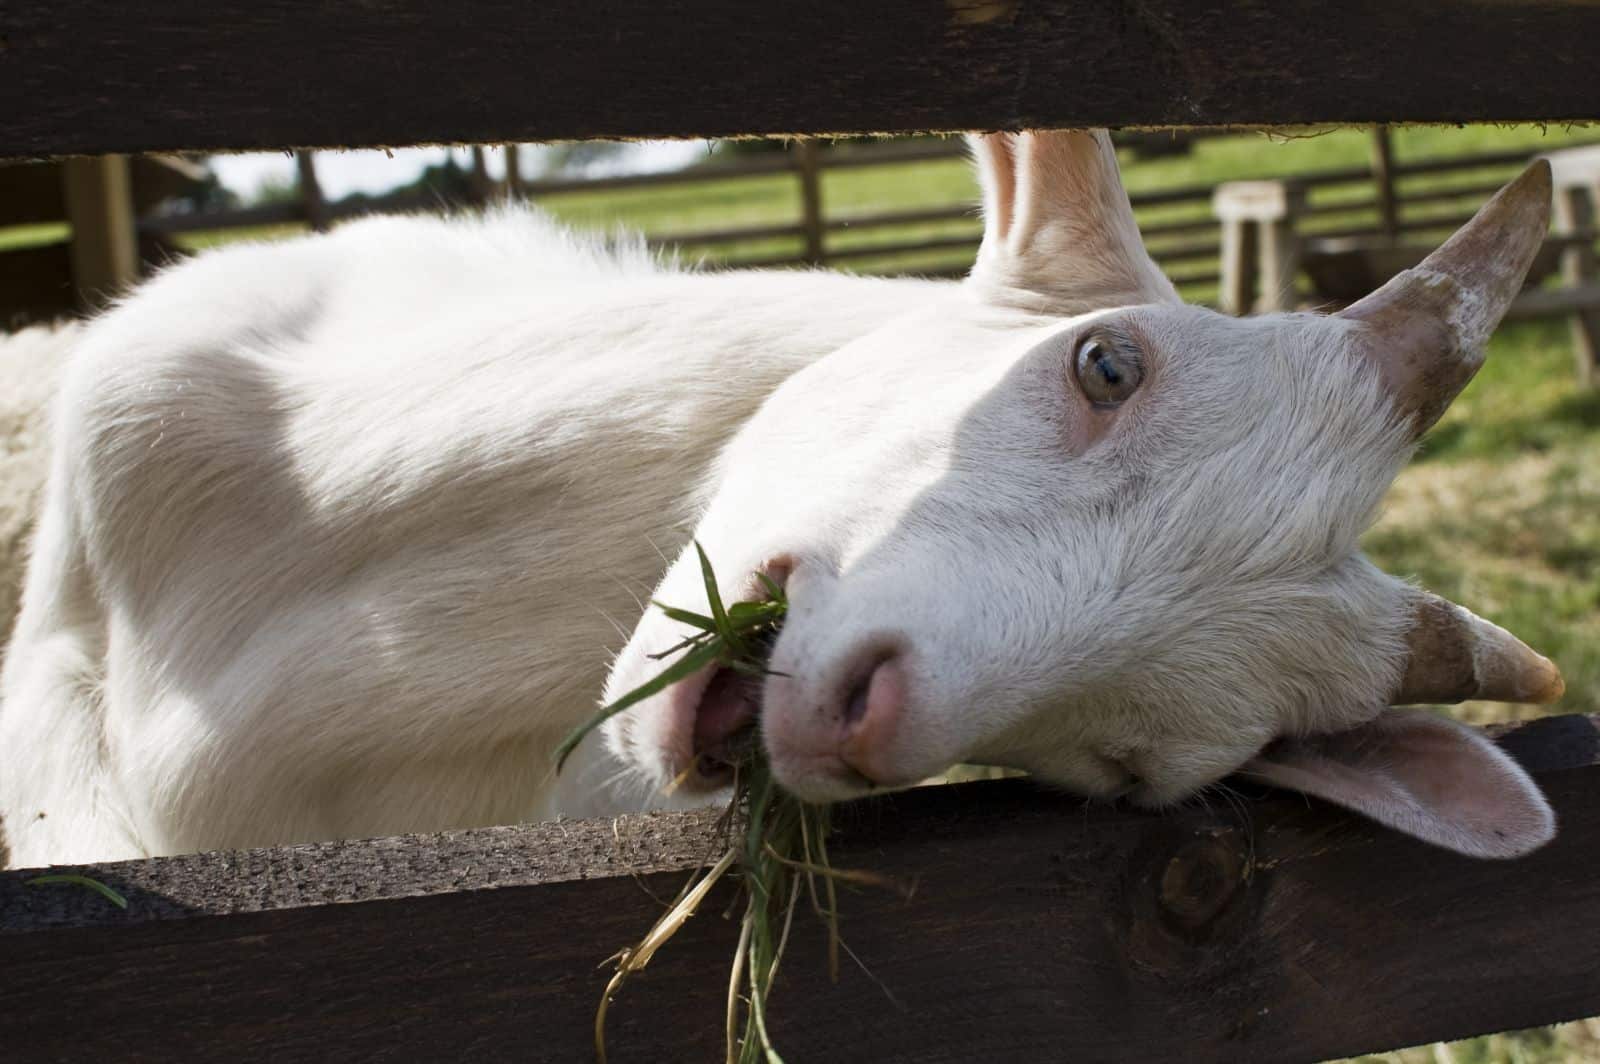 What is a dream goat dreaming about?